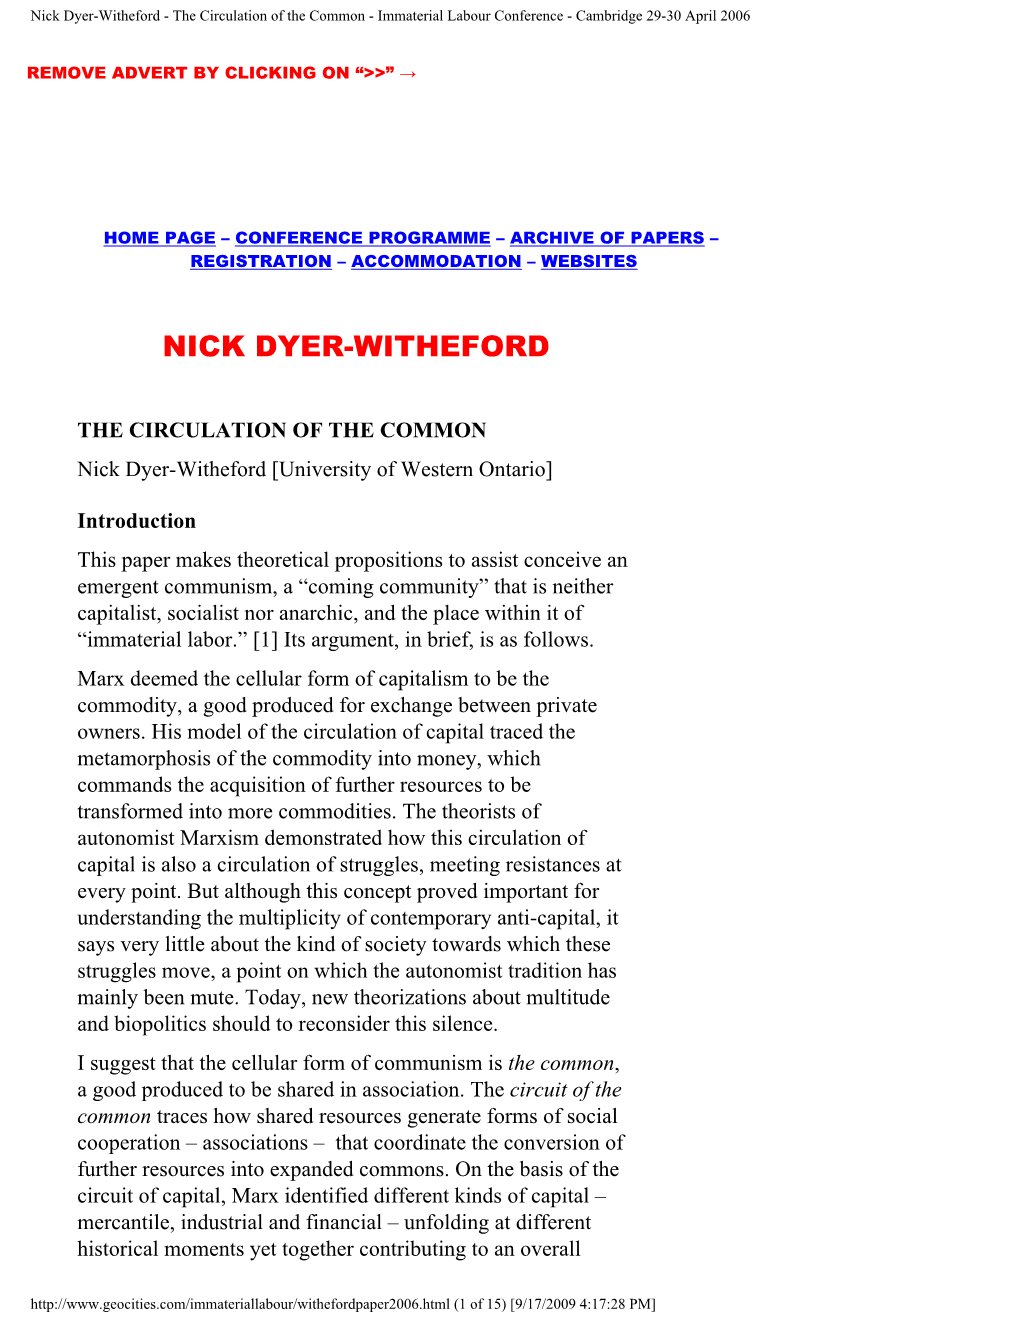 Nick Dyer-Witheford - the Circulation of the Common - Immaterial Labour Conference - Cambridge 29-30 April 2006